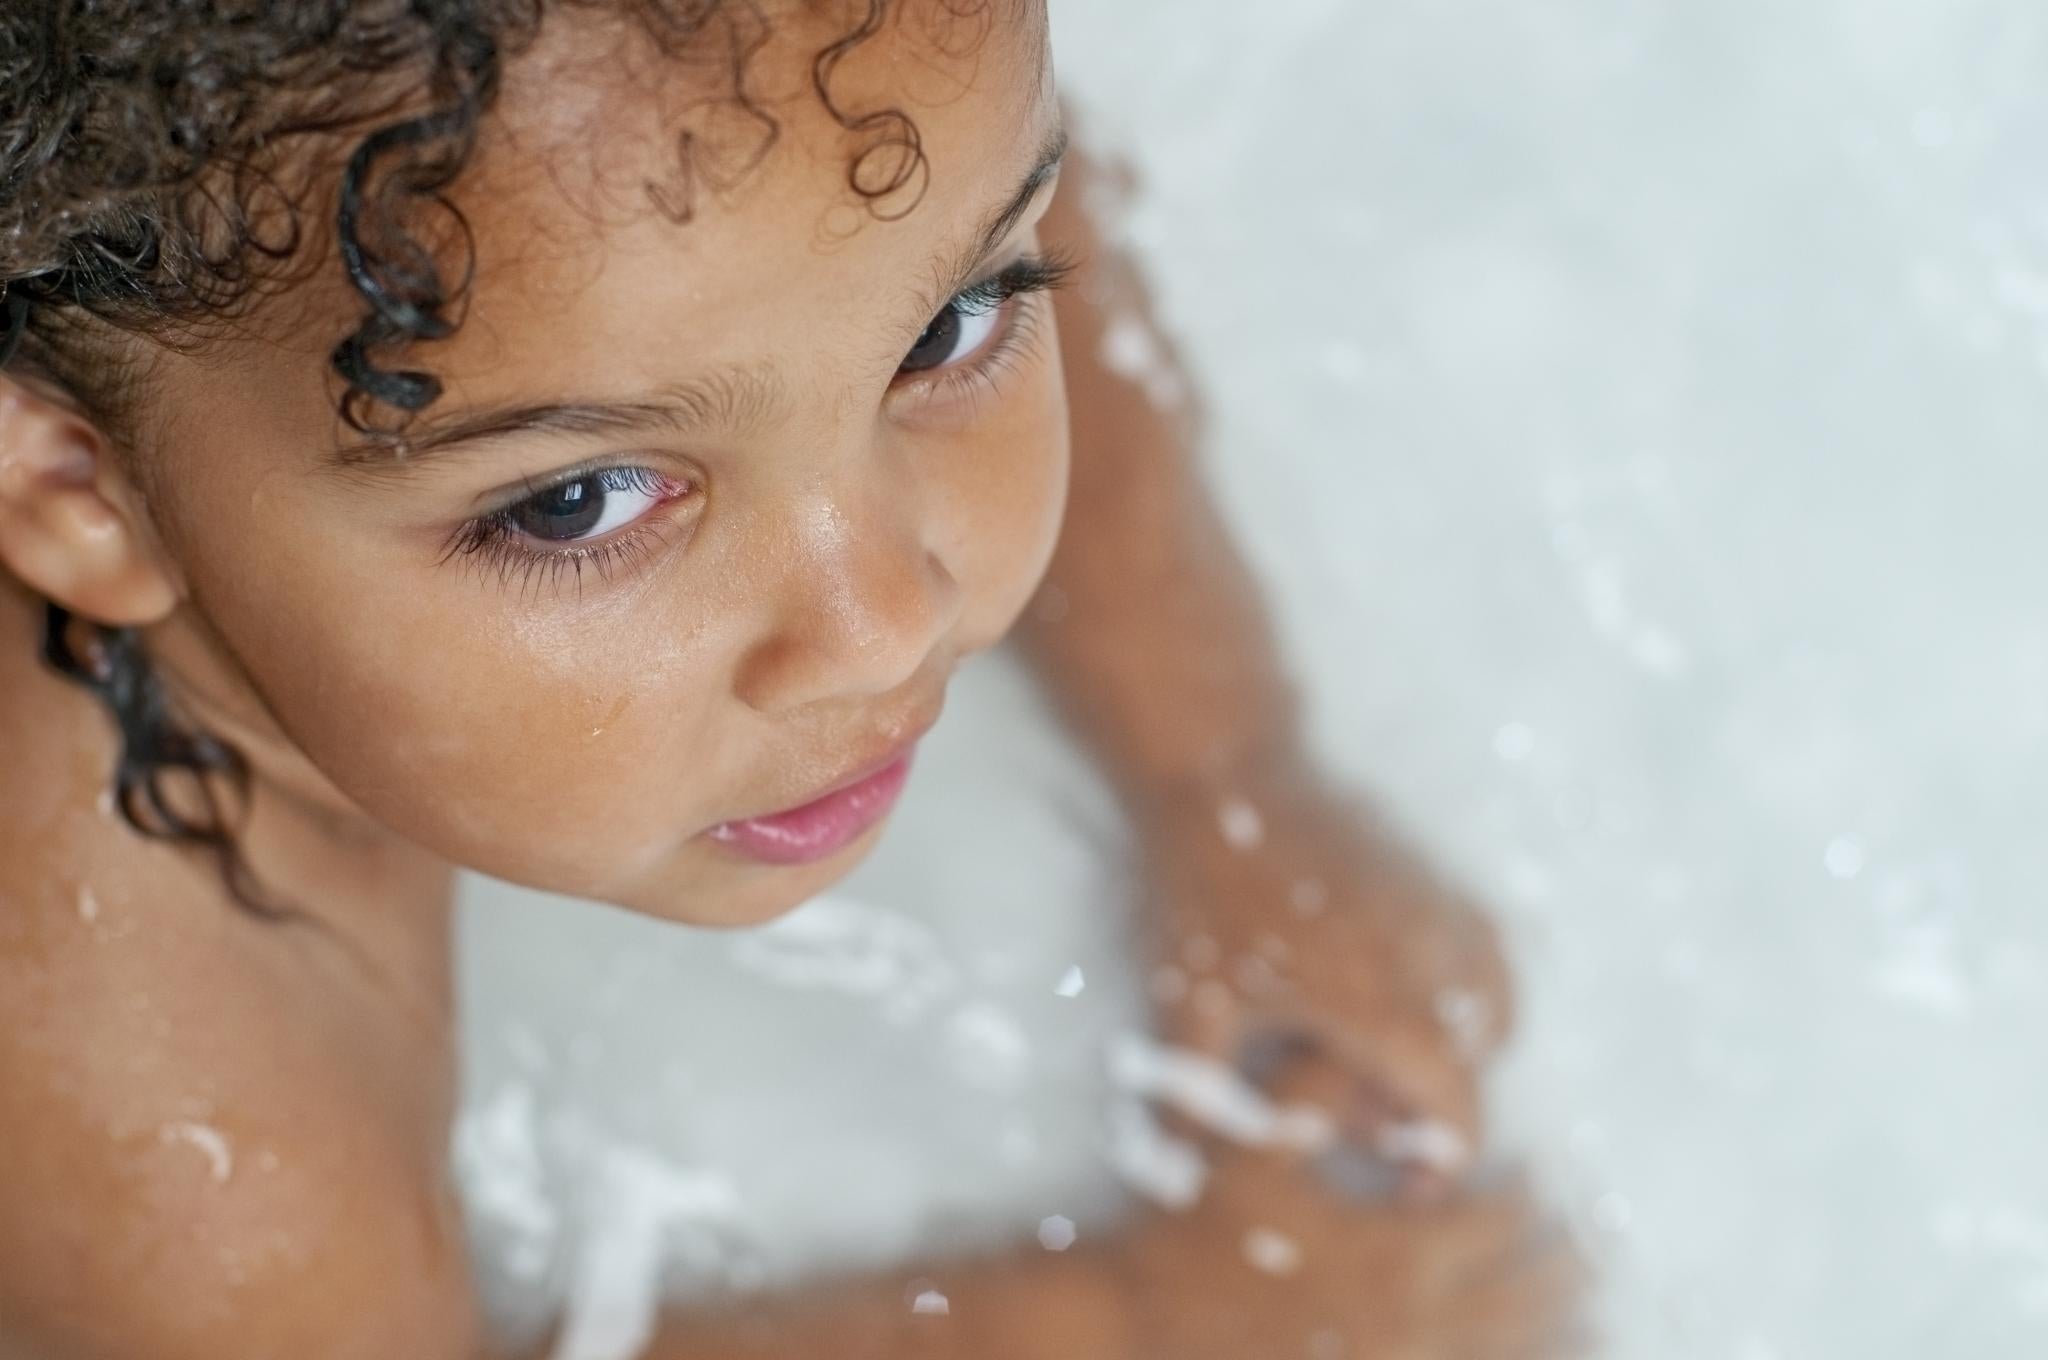 5 Tips for Making Your Child's Wash Day Easier
